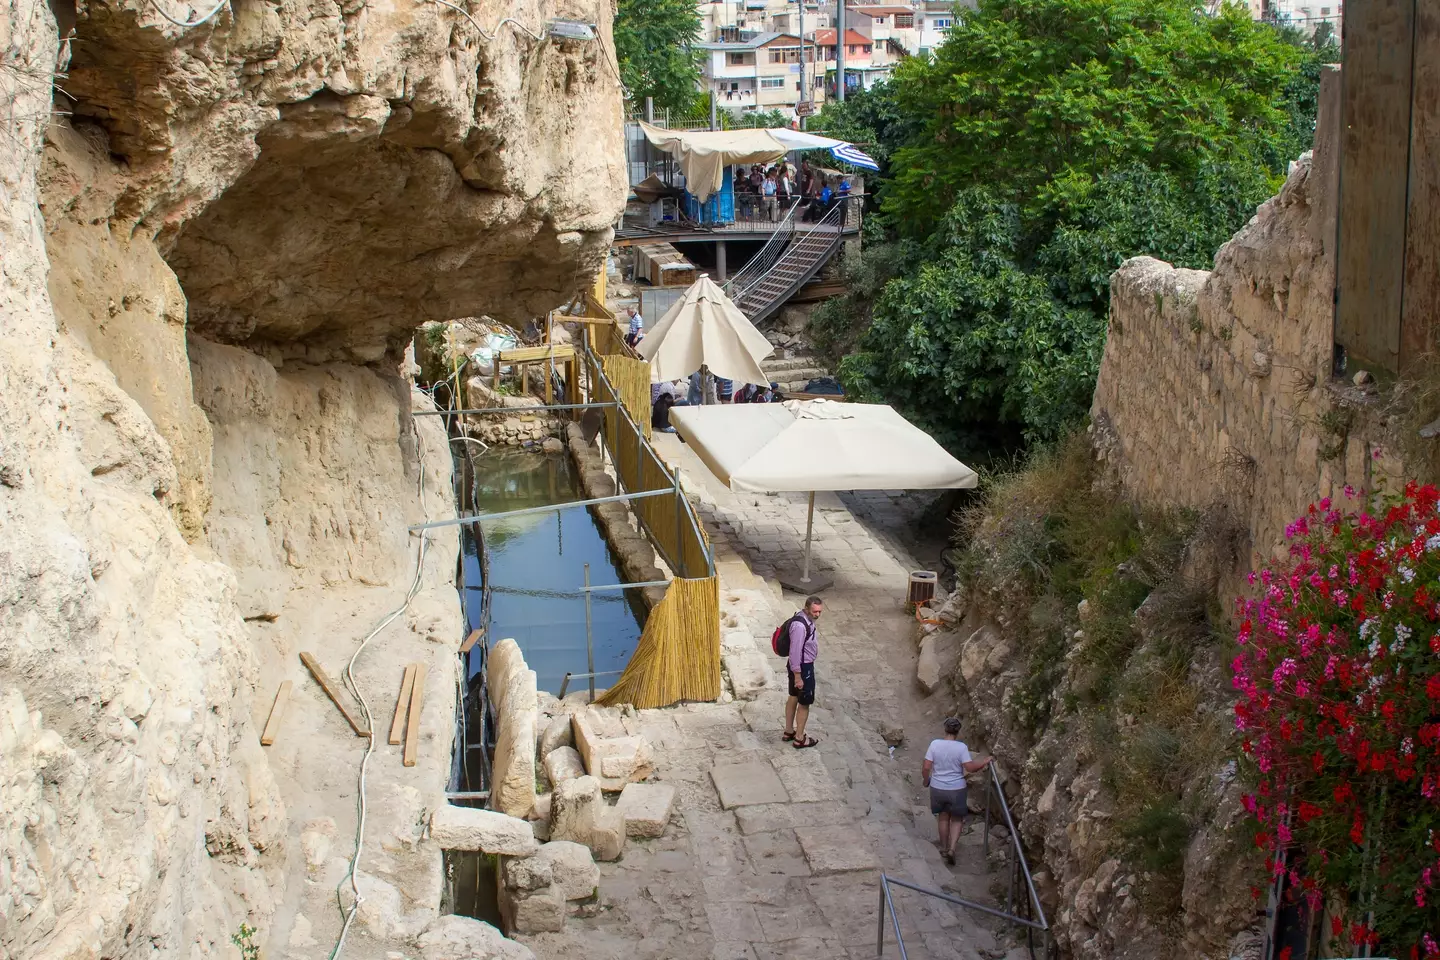 The Biblical site is in the process of being excavated.